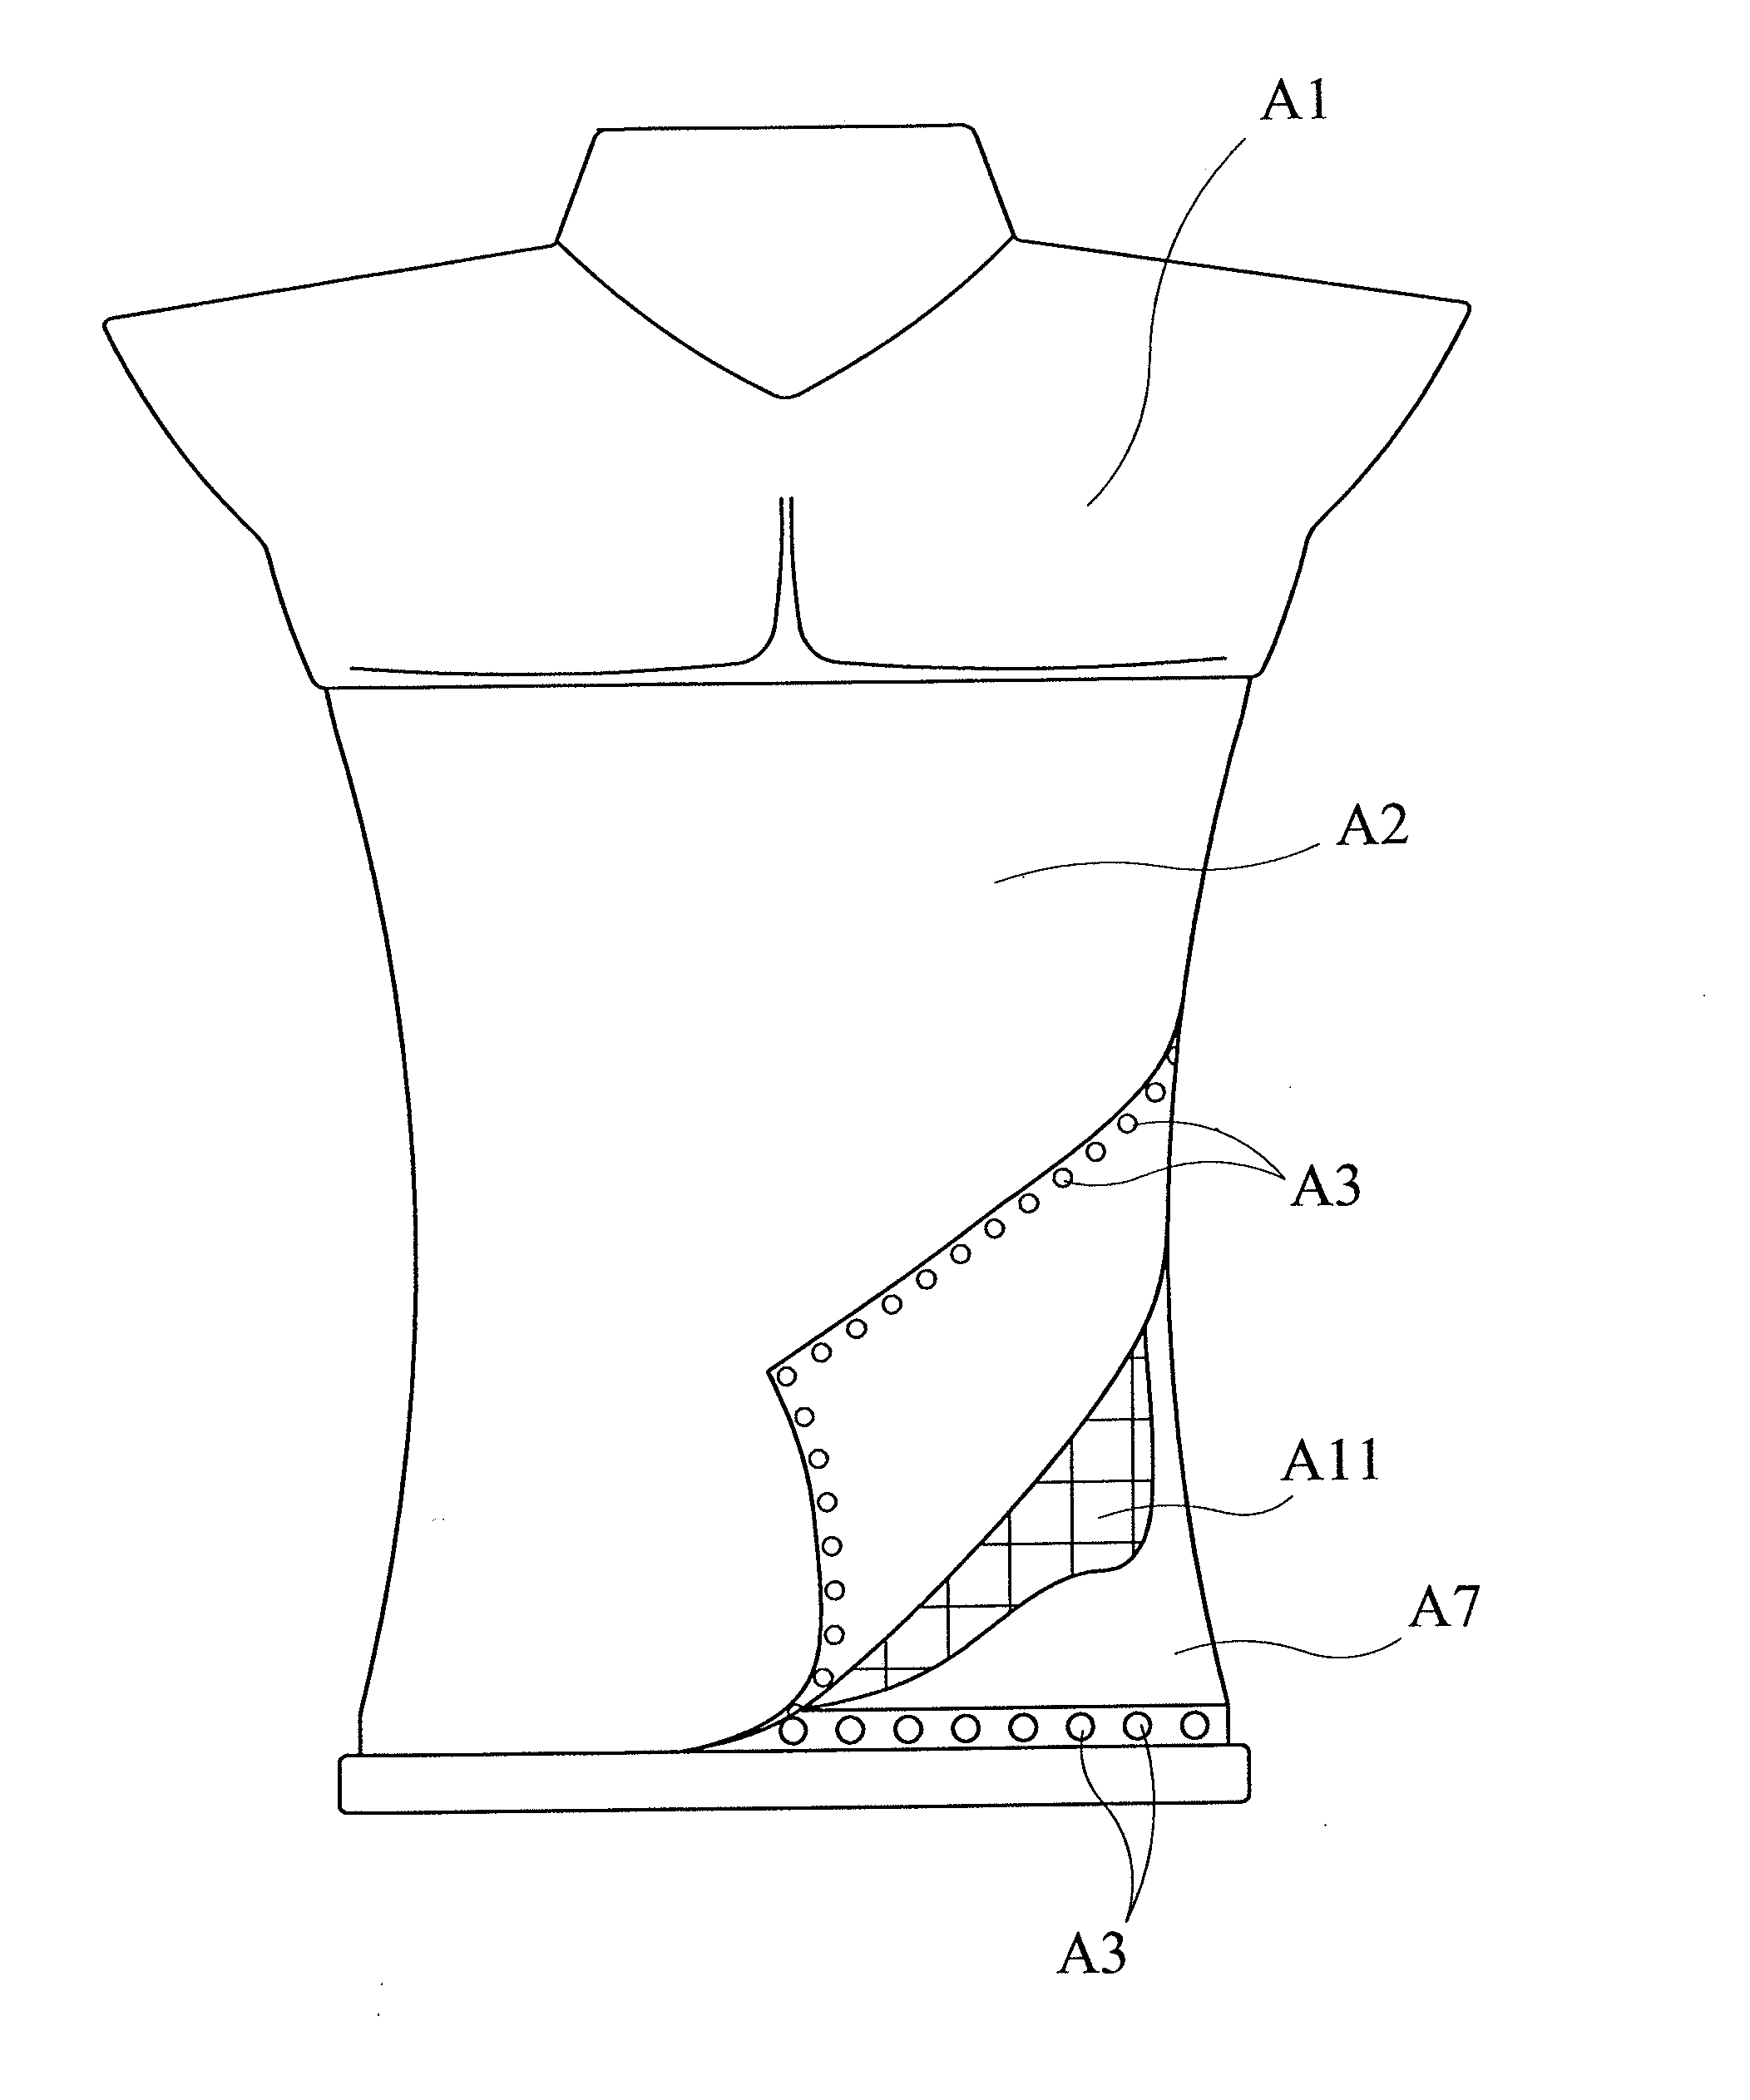 Dynamically-changeable abdominal simulator system